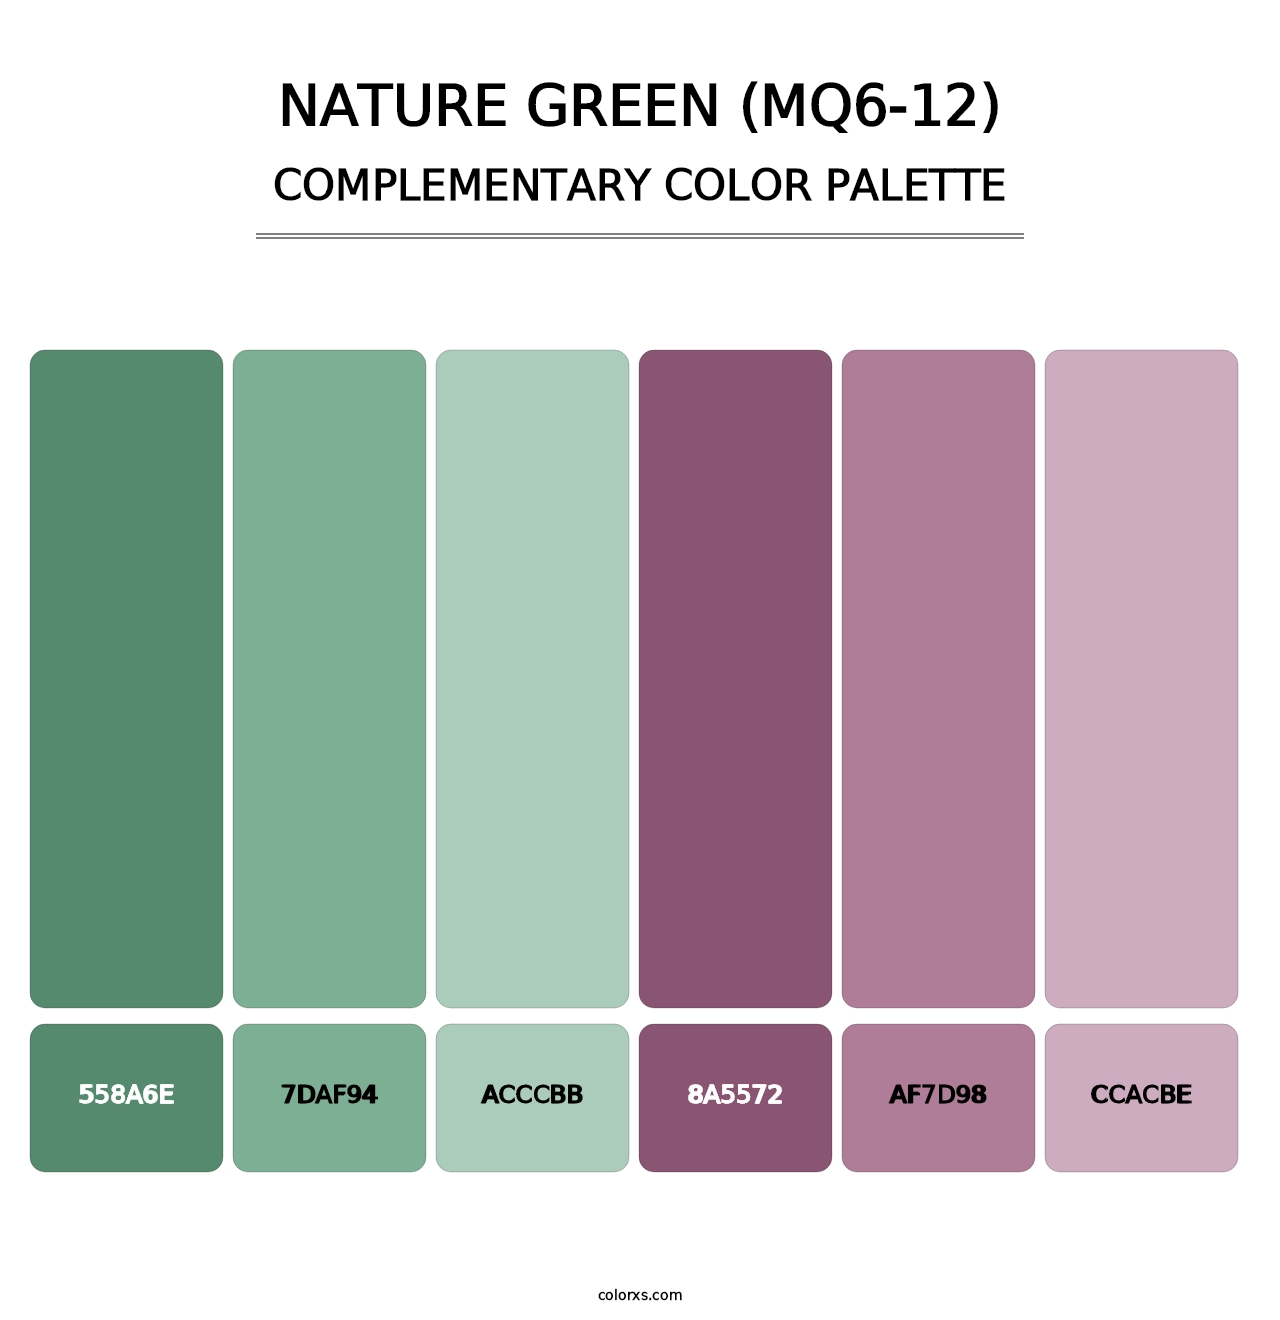 Nature Green (MQ6-12) - Complementary Color Palette